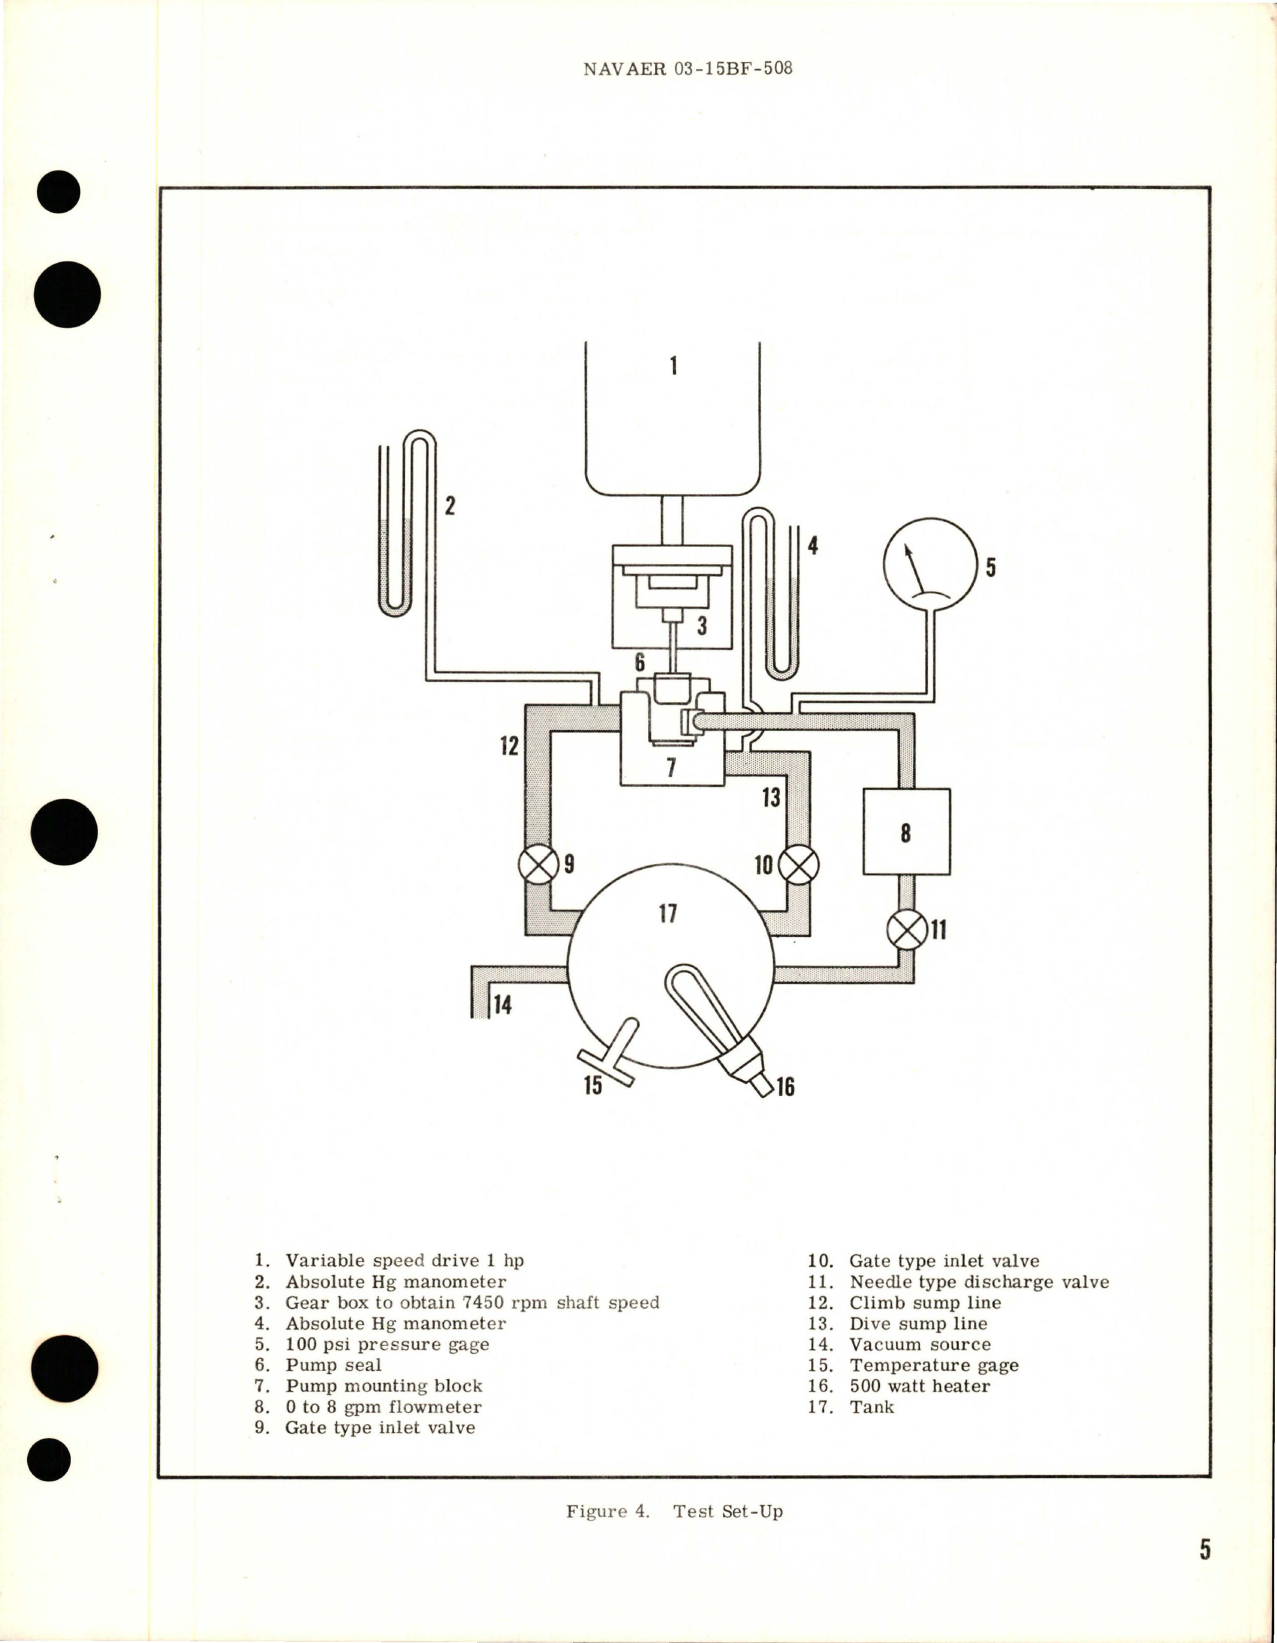 Sample page 5 from AirCorps Library document: Overhaul Instructions with Parts for # 3 Oil Scavenge Pump - Models RG16250 and RG16250B